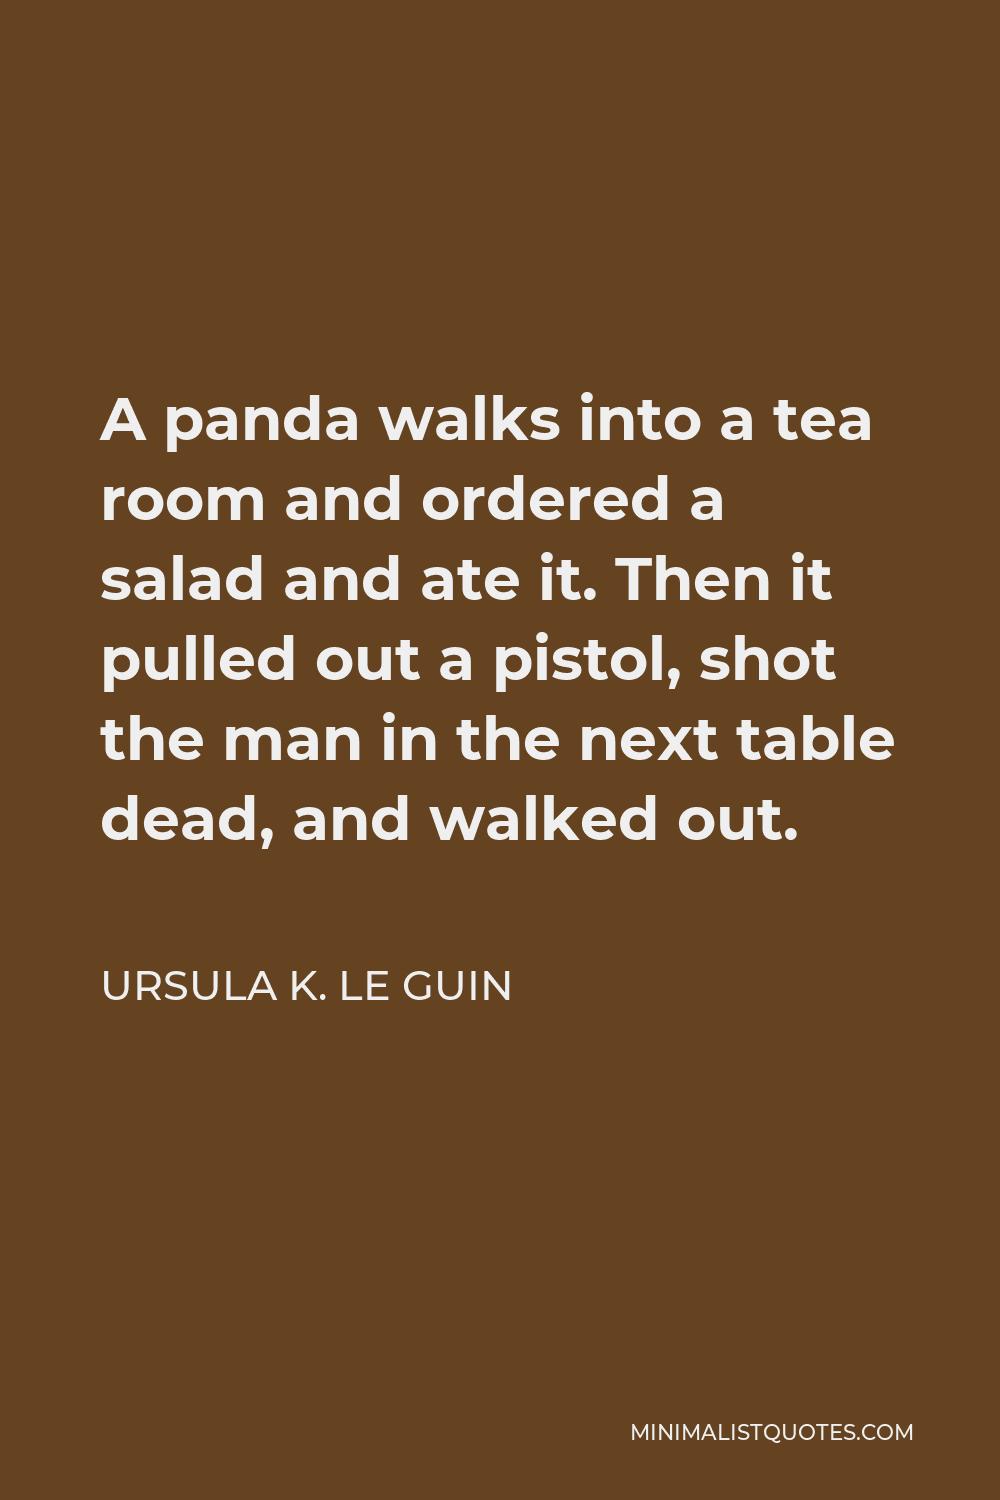 Ursula K. Le Guin Quote - A panda walks into a tea room and ordered a salad and ate it. Then it pulled out a pistol, shot the man in the next table dead, and walked out.